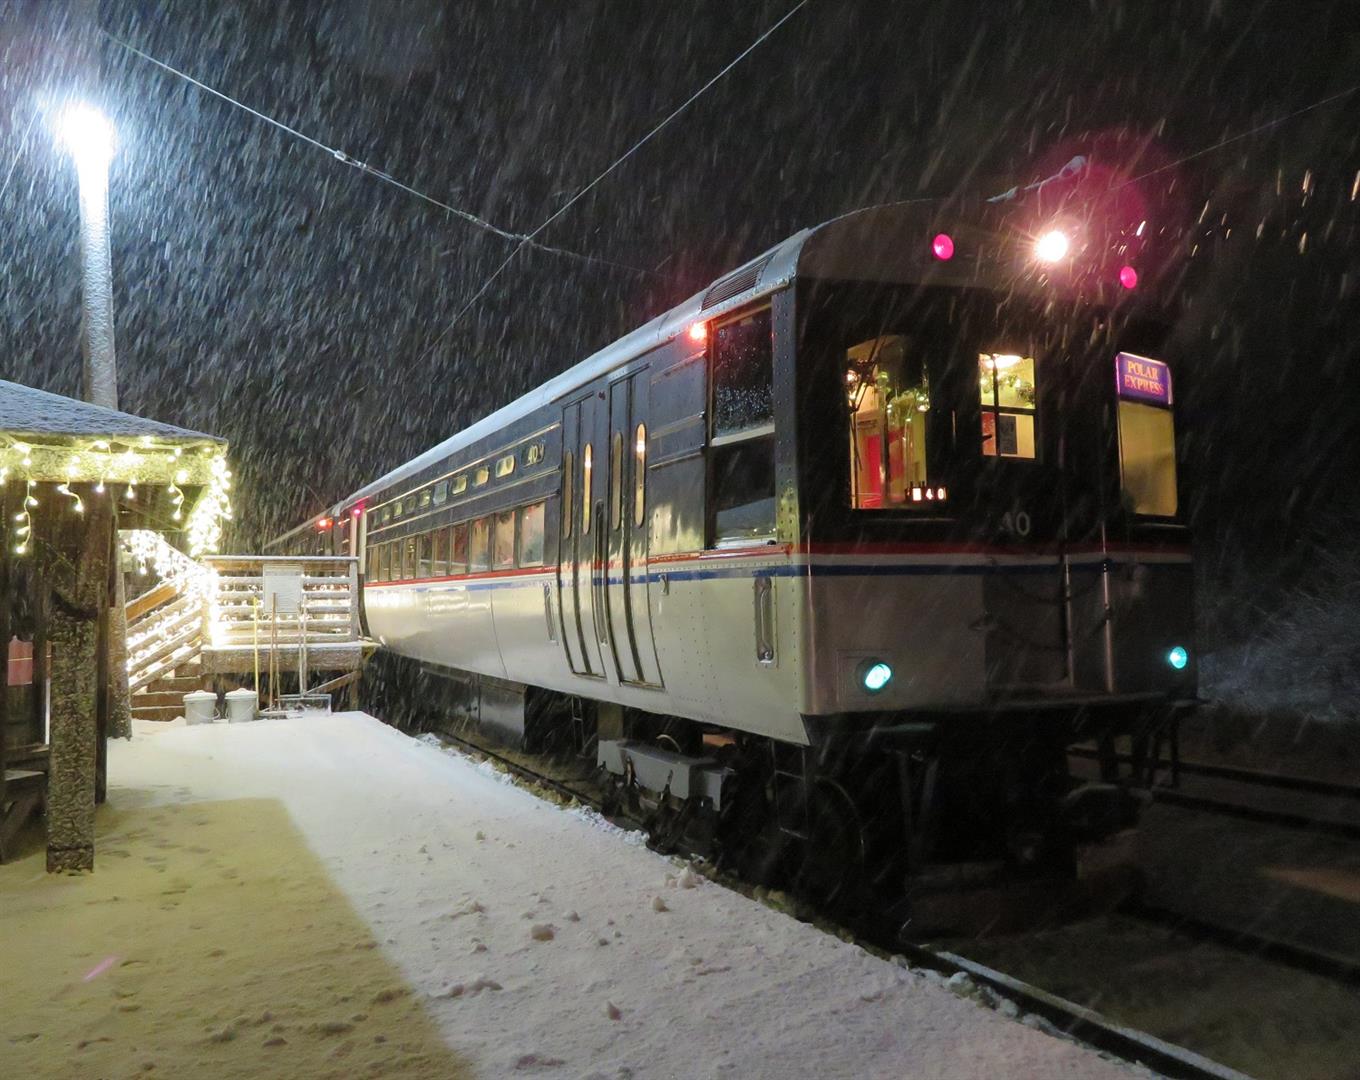 The Polar Express prepares for its next departure